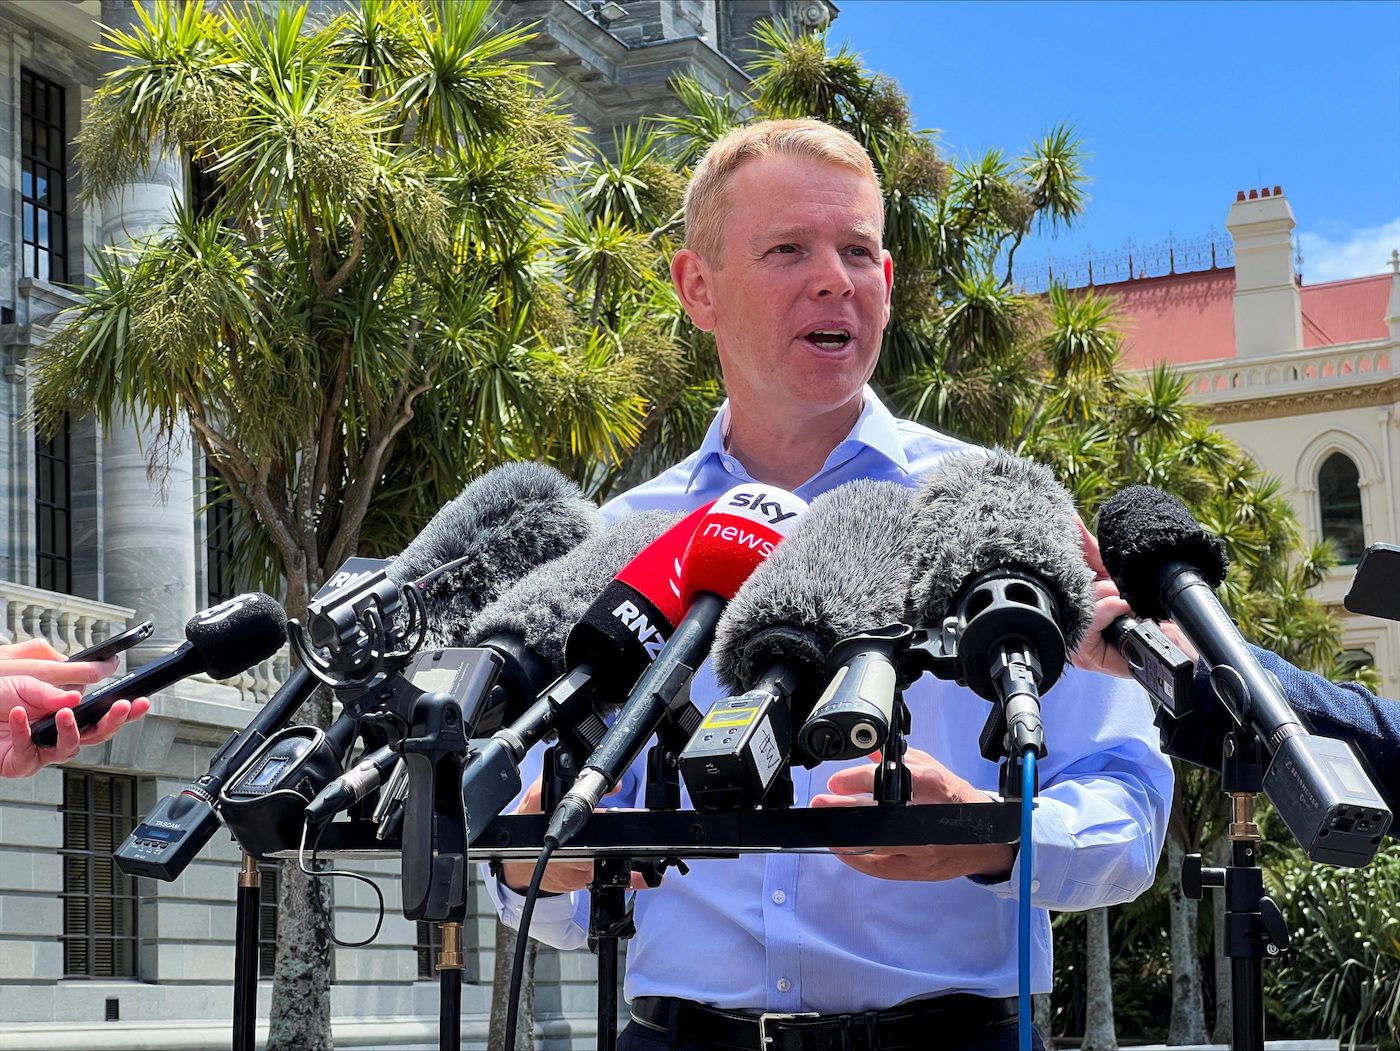 Troubleshooter Chris Hipkins faces a tough road as New Zealand PM